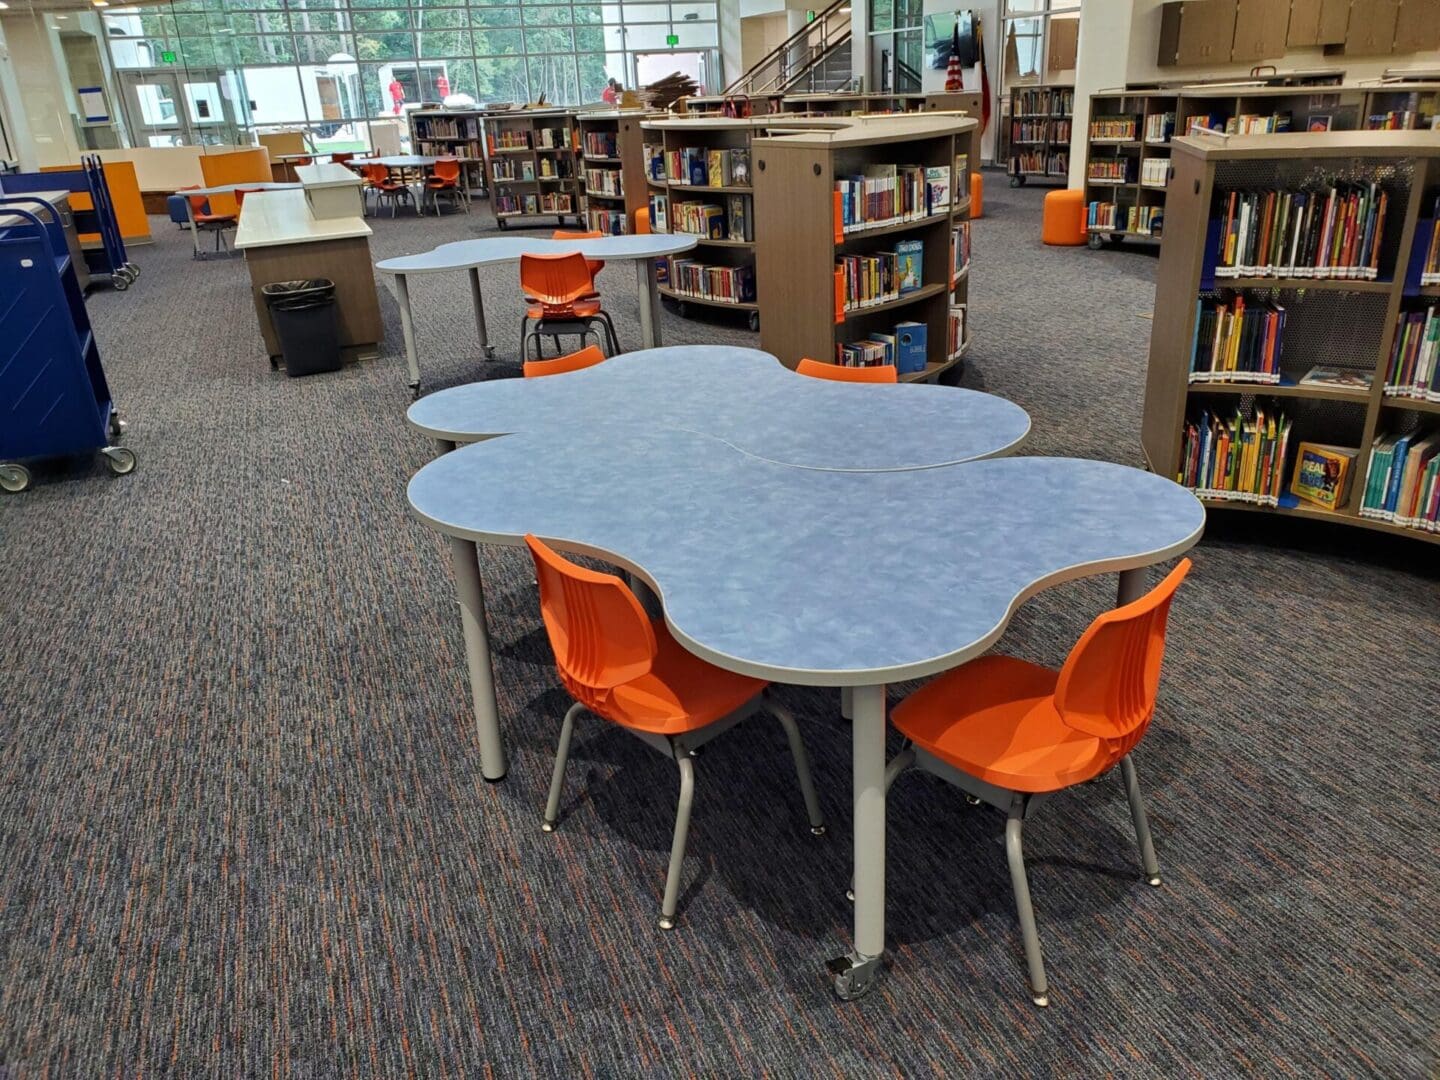 A library with tables and chairs in the shape of a cloud.